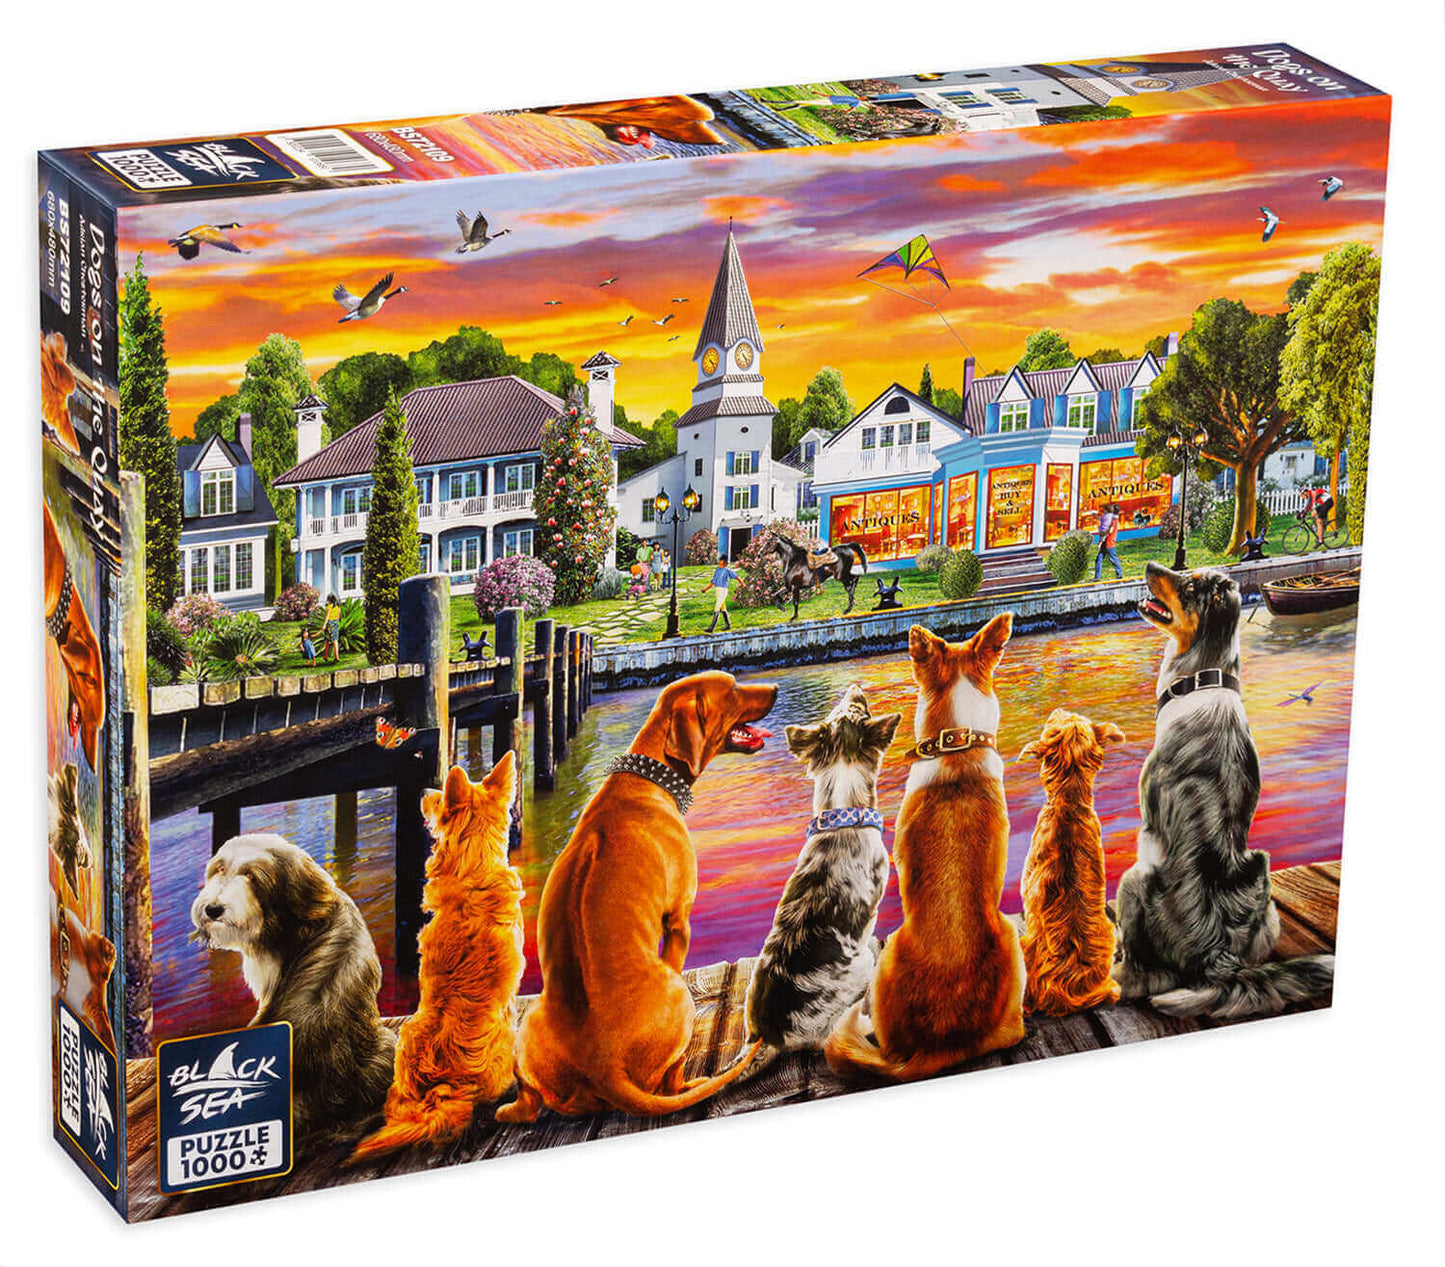 Puzzle Black Sea 1000 pieces - Dogs on the Quay